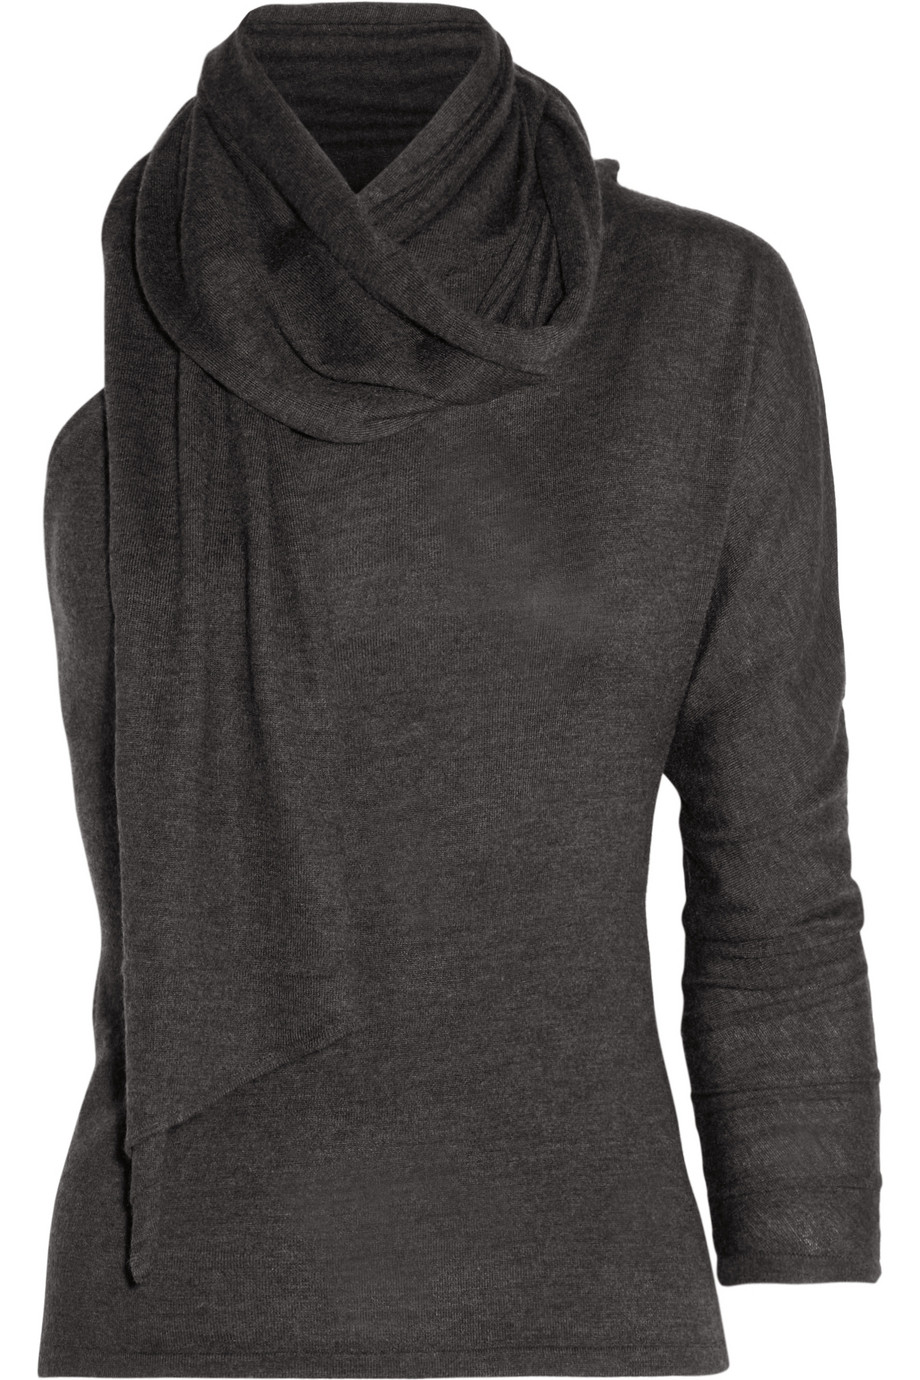 Ralph lauren collection One-shoulder Scarf-neck Cashmere Sweater in ...